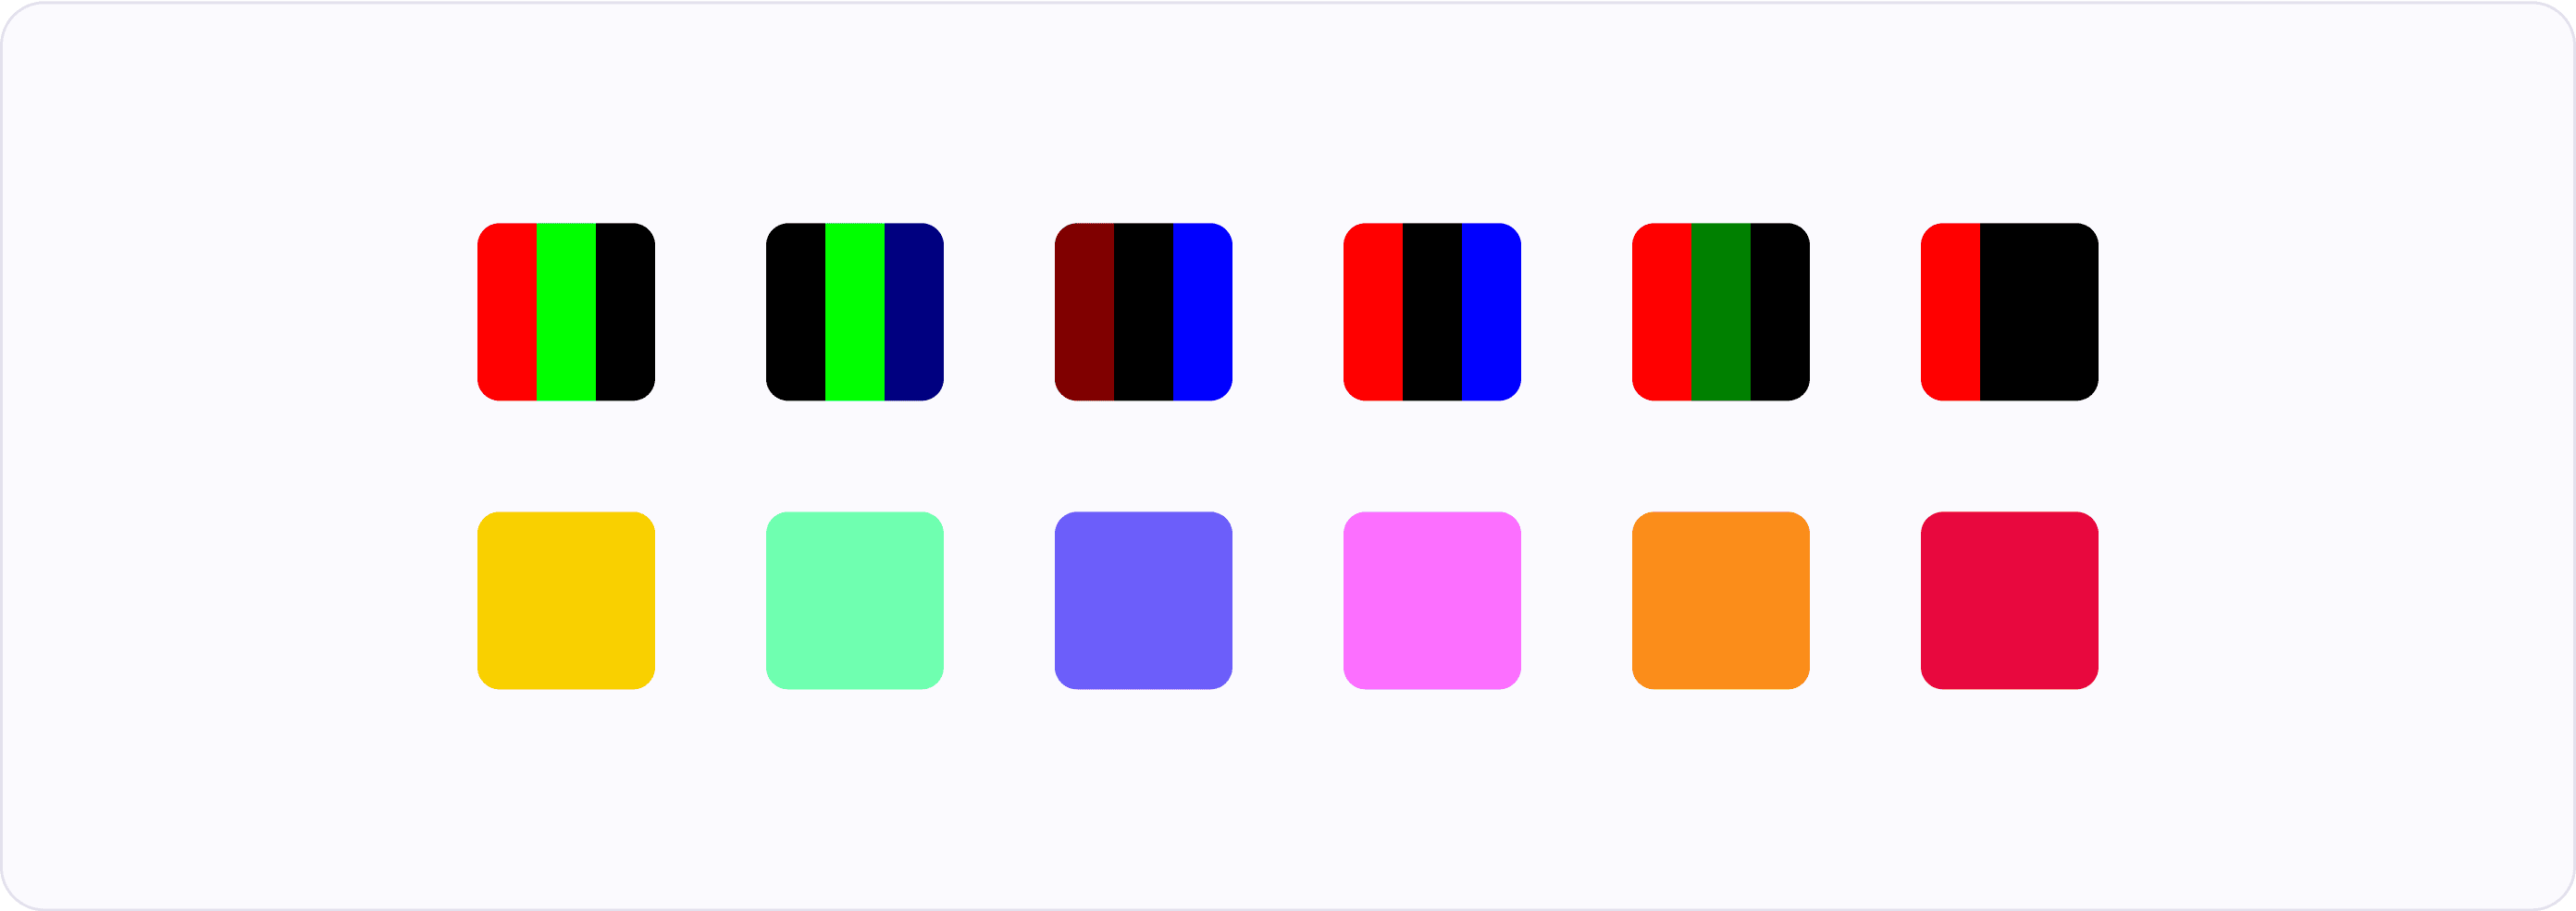 RGB pixels mix their channels to create different colors